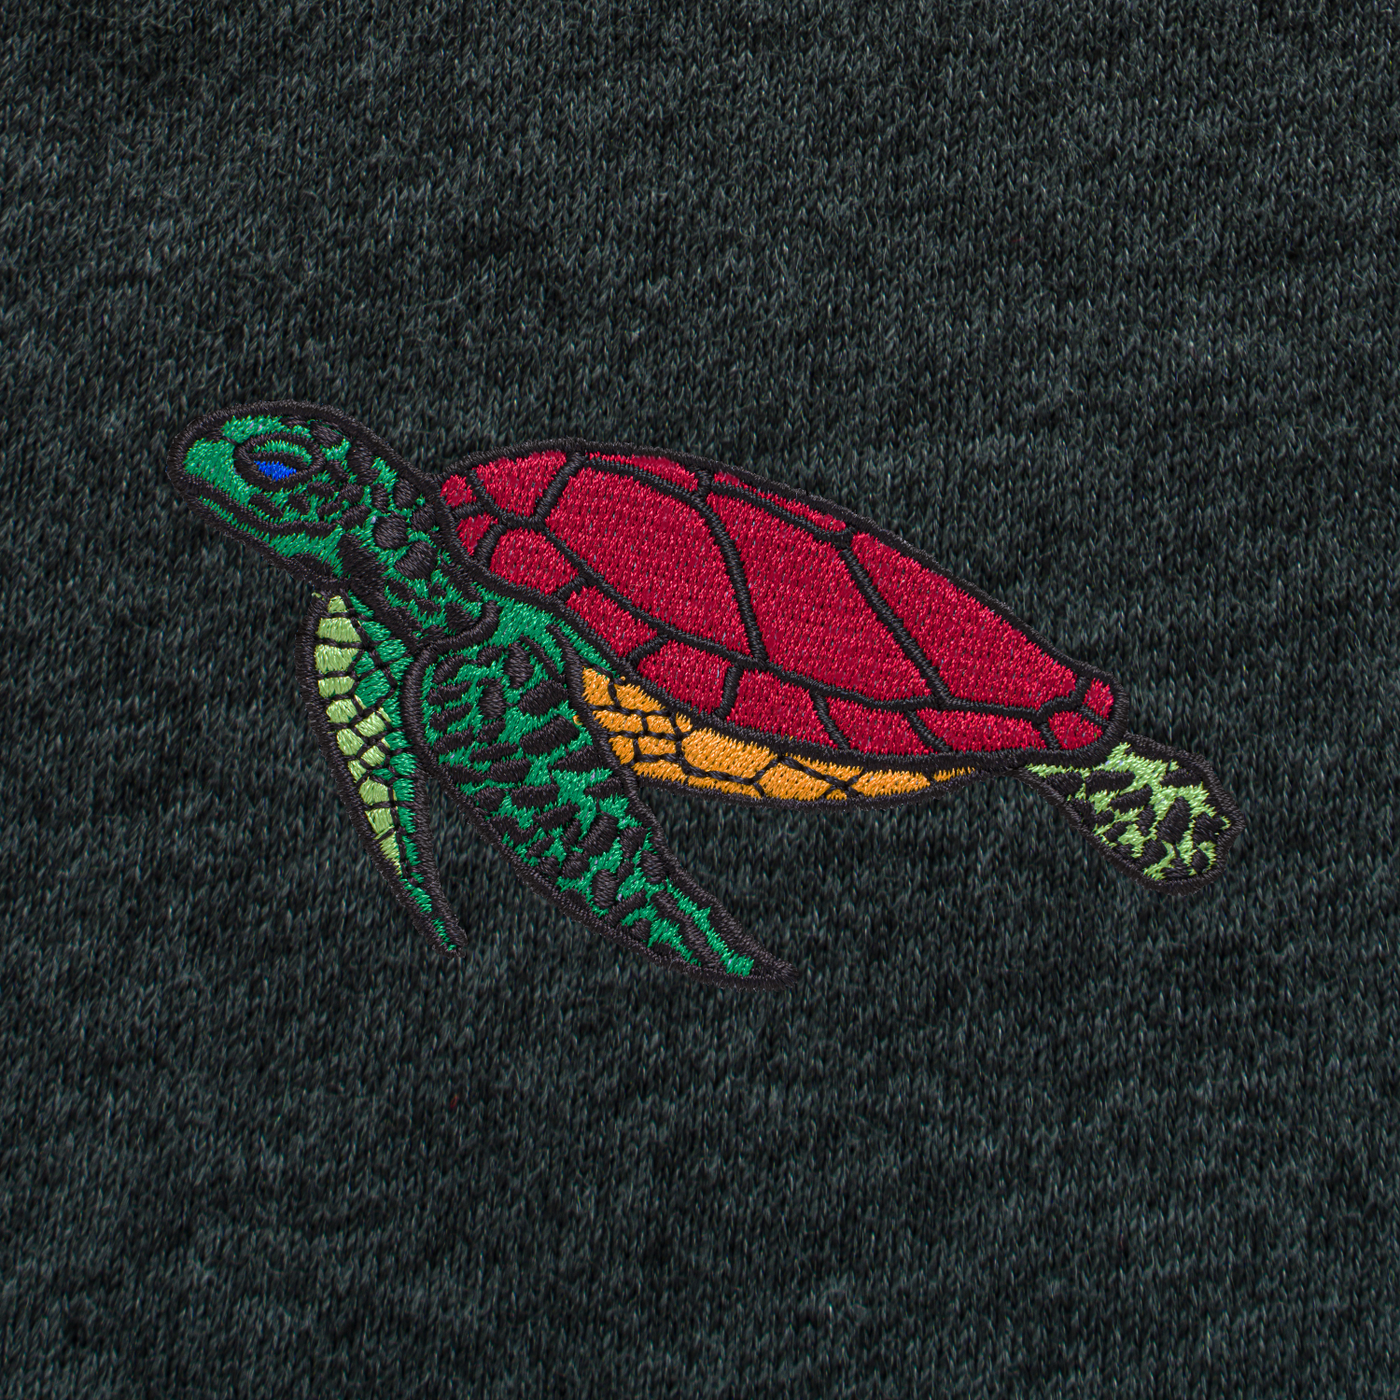 Bobby's Planet Men's Embroidered Sea Turtle Long Sleeve Shirt from Seven Seas Fish Animals Collection in Dark Grey Heather Color#color_dark-grey-heather